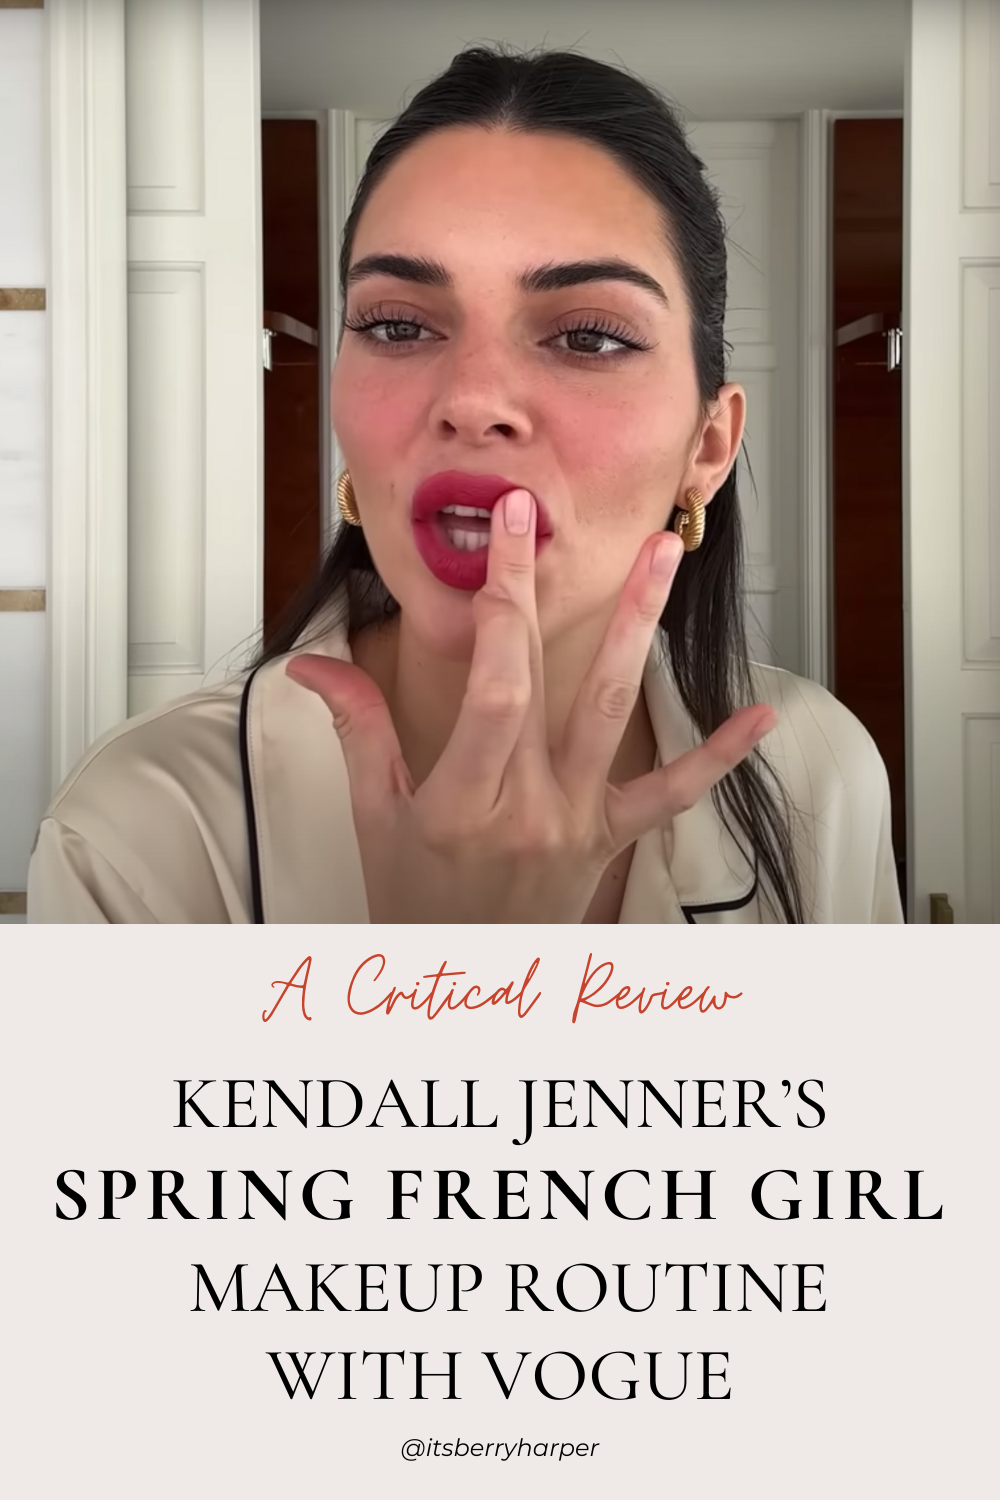 A Critical Review of Kendall Jenner’s “Spring French Girl” Makeup ...